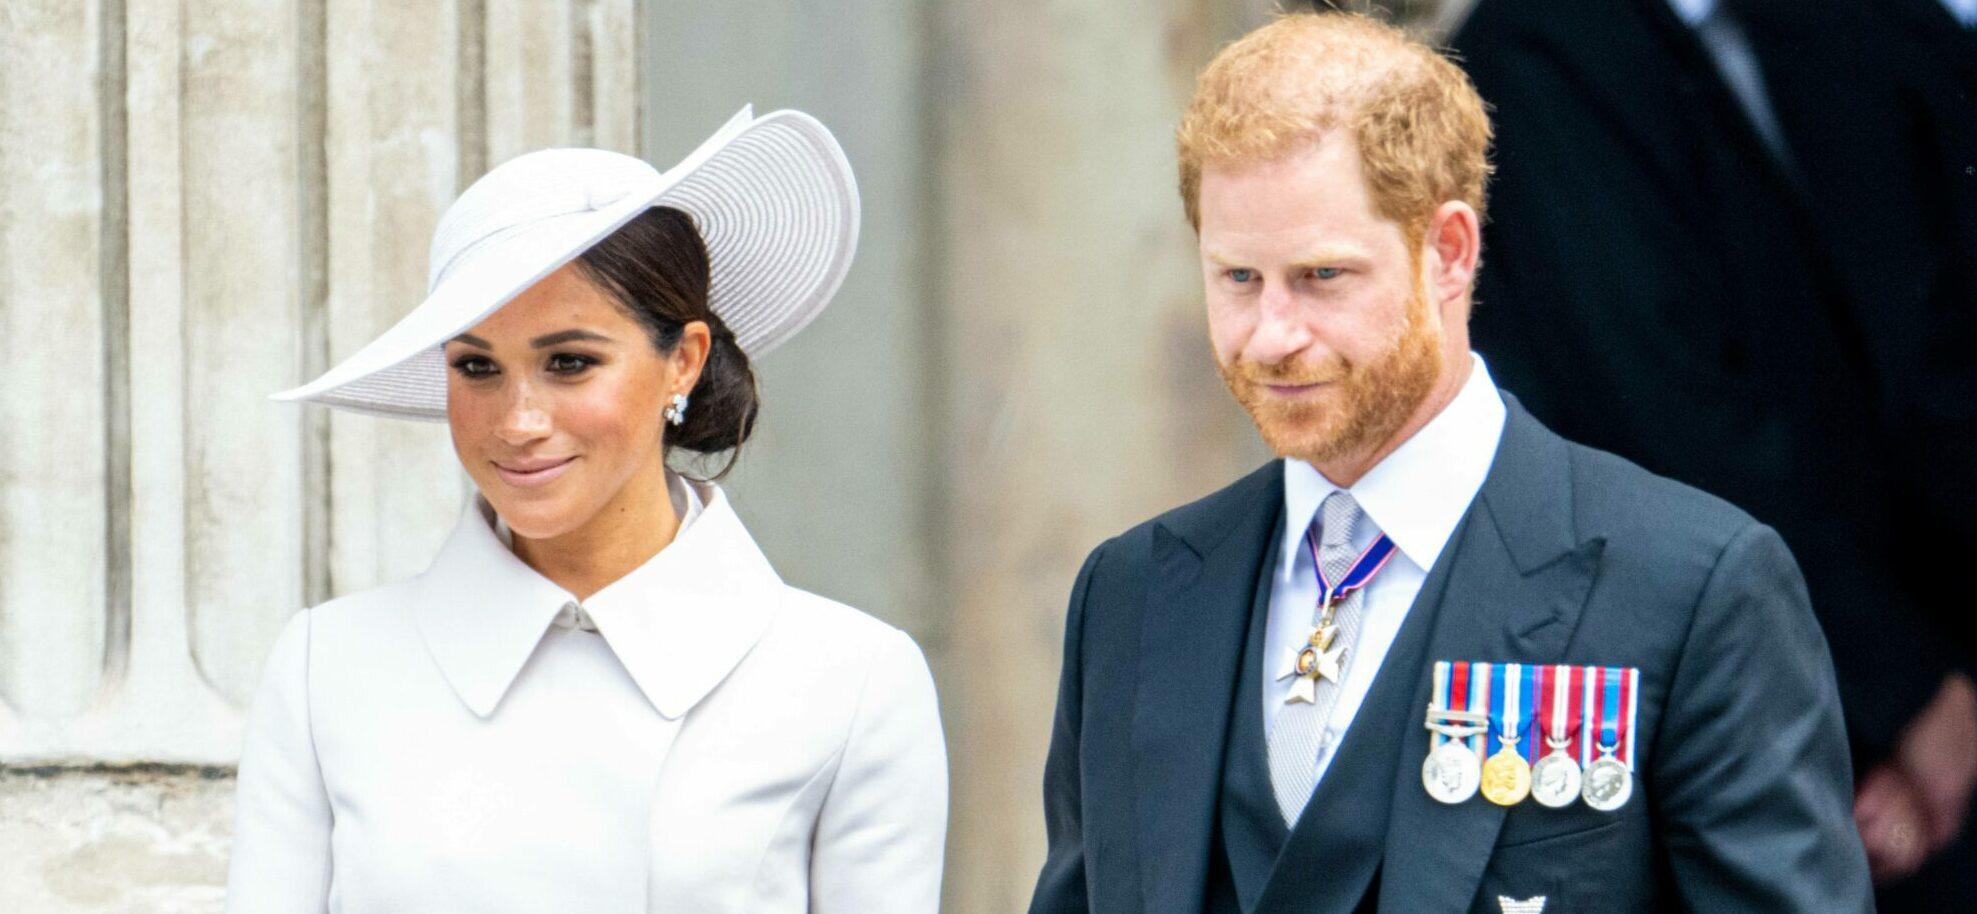 Meghan Markle’s Suits Co-Star Claims There Was A ‘Foul Smell’ During Her Wedding To Prince Harry